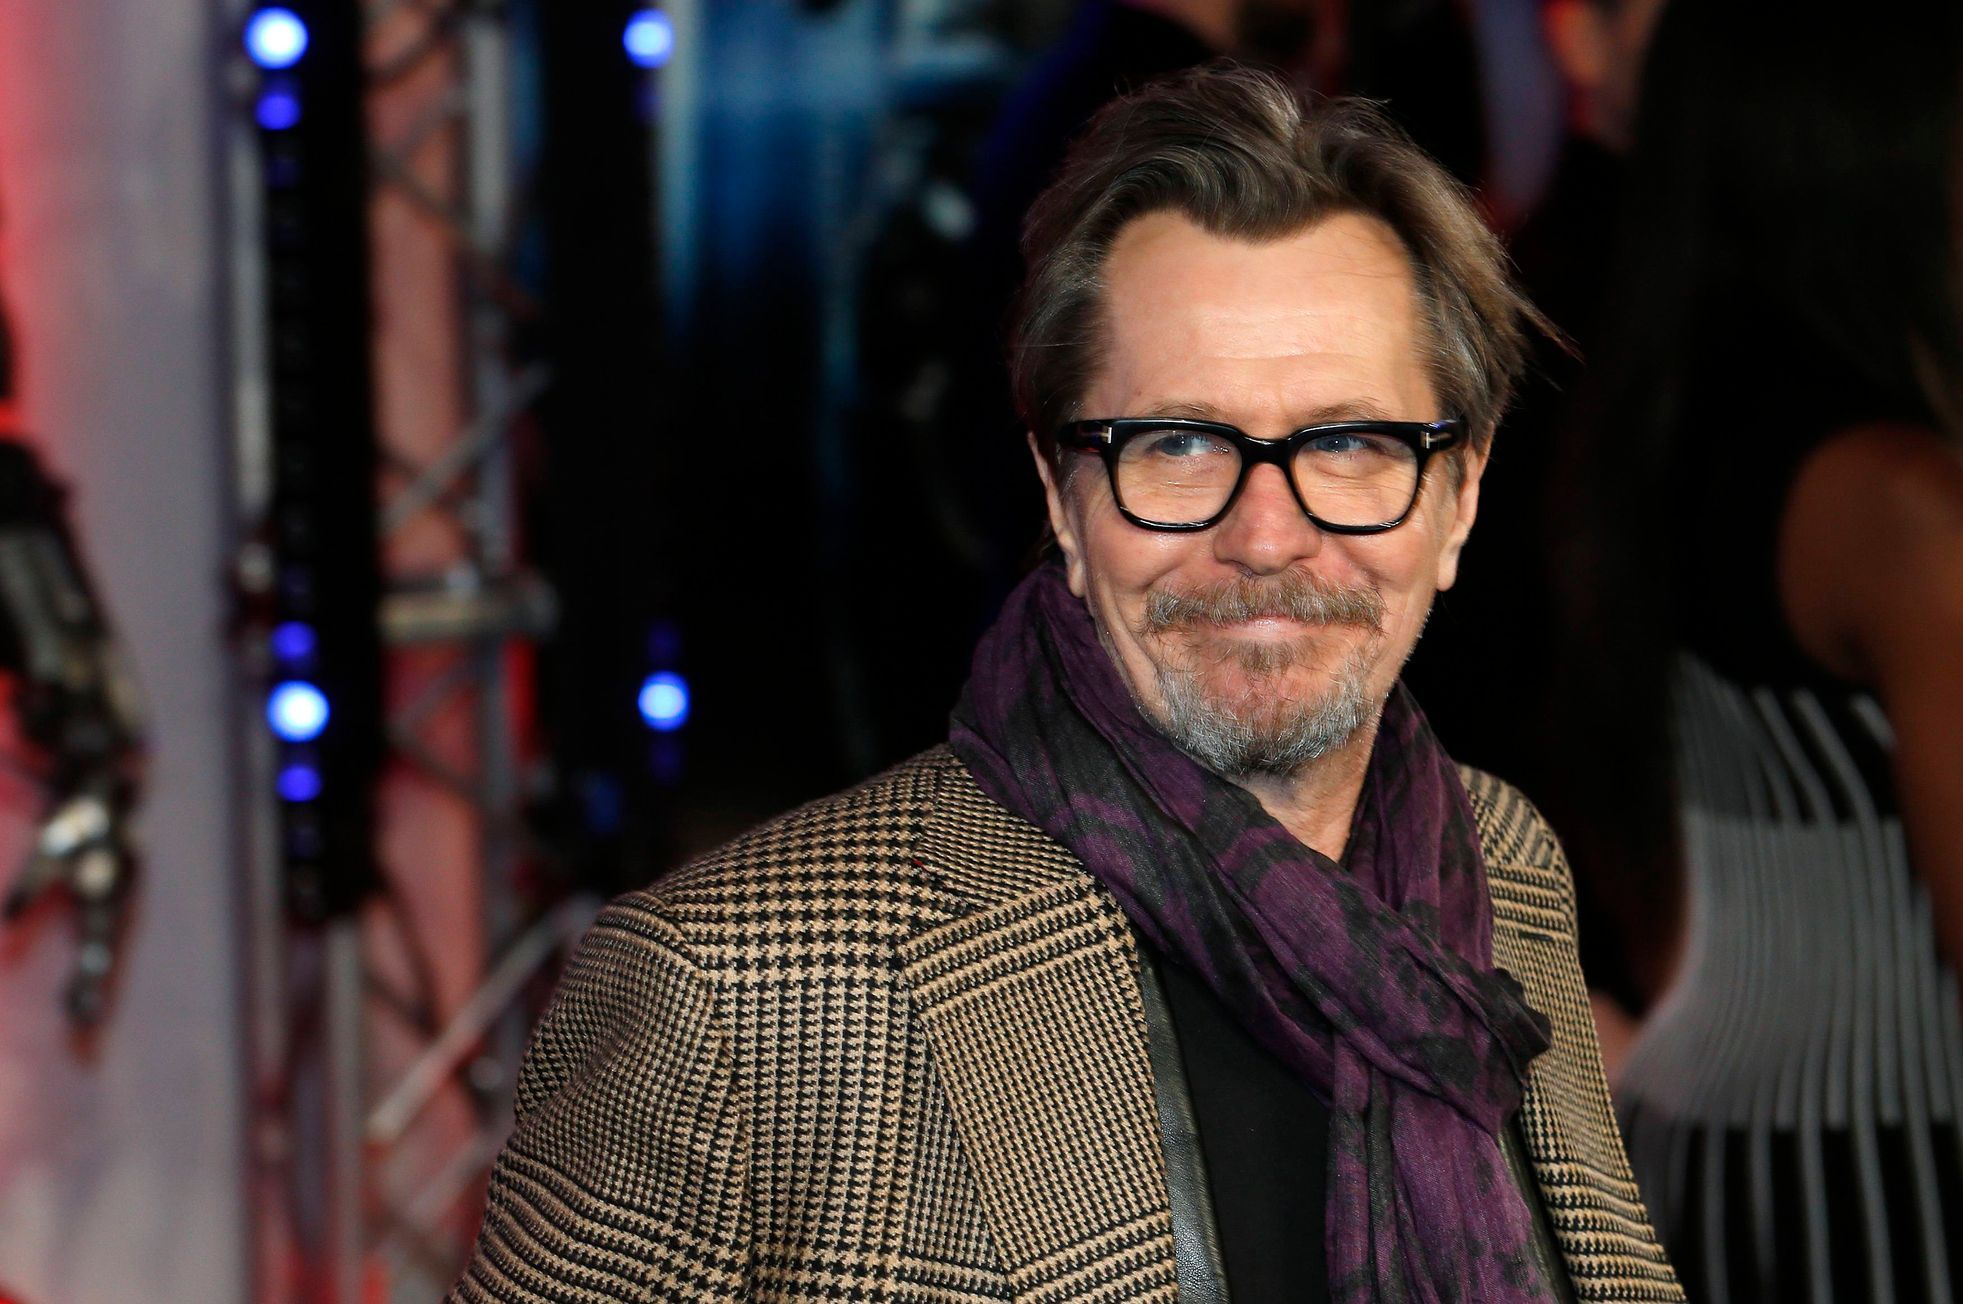 File photo of cast member Oldman posing for photographers as he arrives at the premiere of Robocop at the BFI IMAX Southbank in London